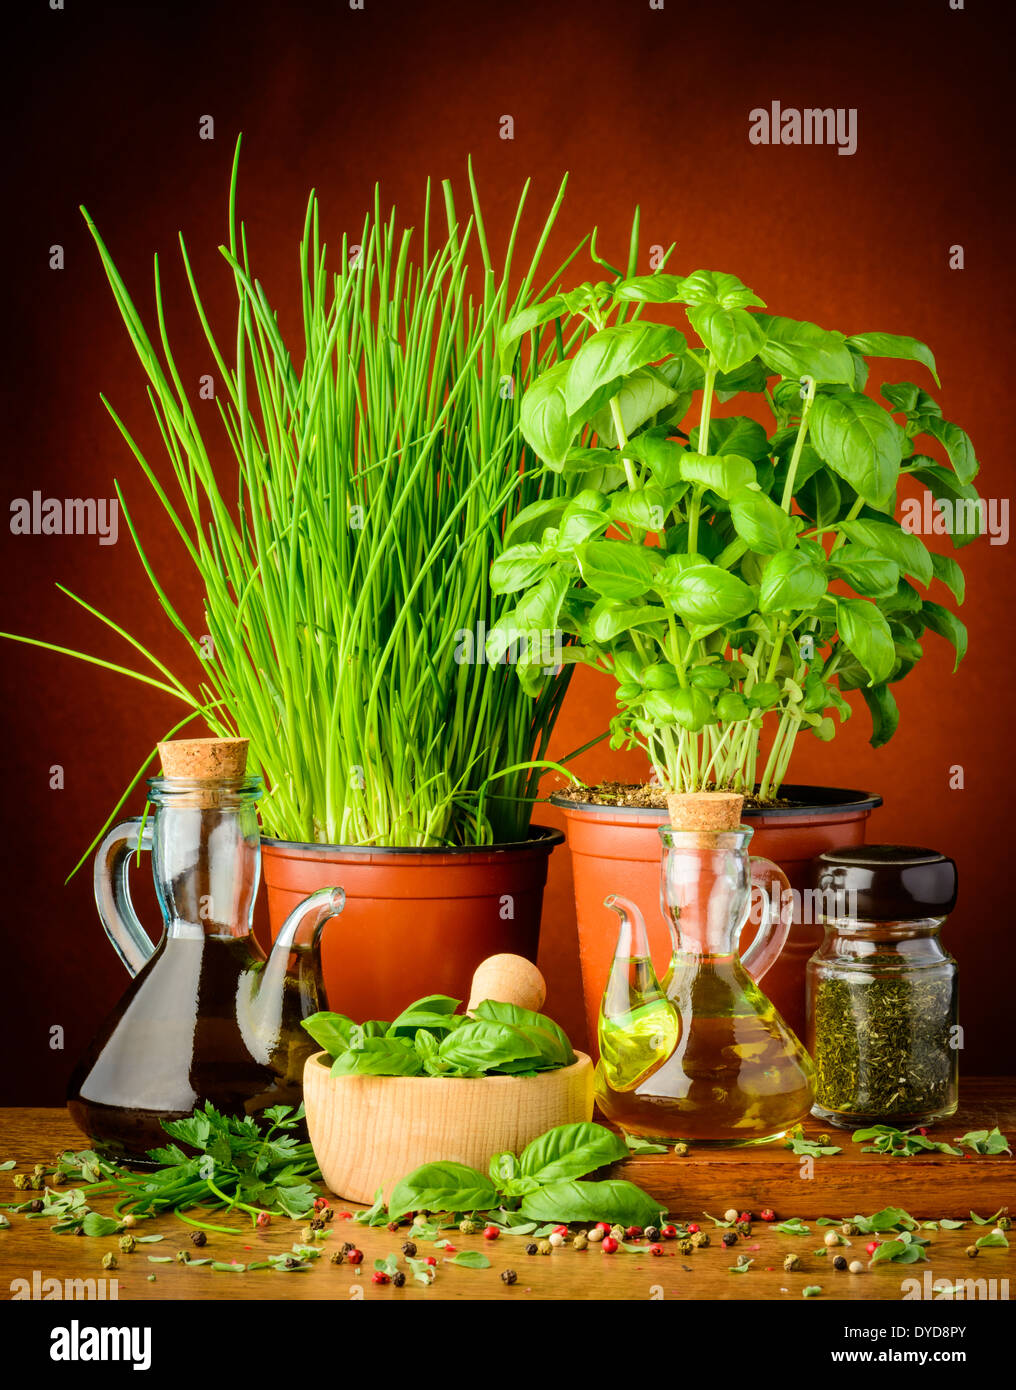 mediterranean seasoning with spices, herbs, olive and herbal oil Stock Photo